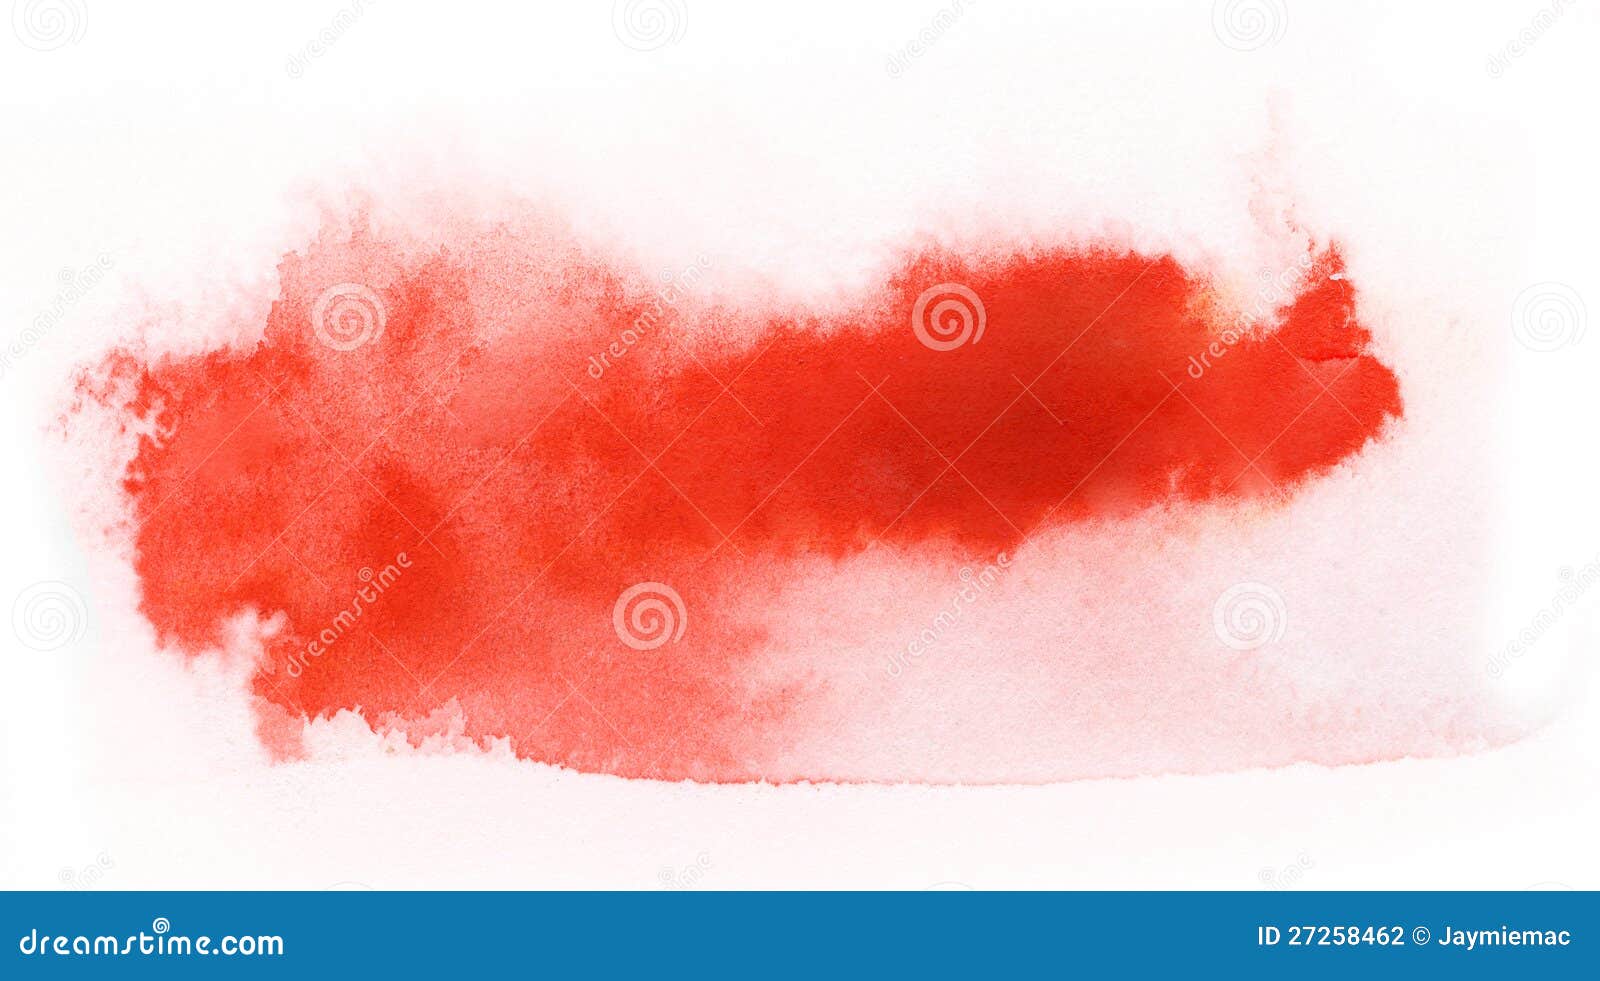 red watercolor paint brush stroke